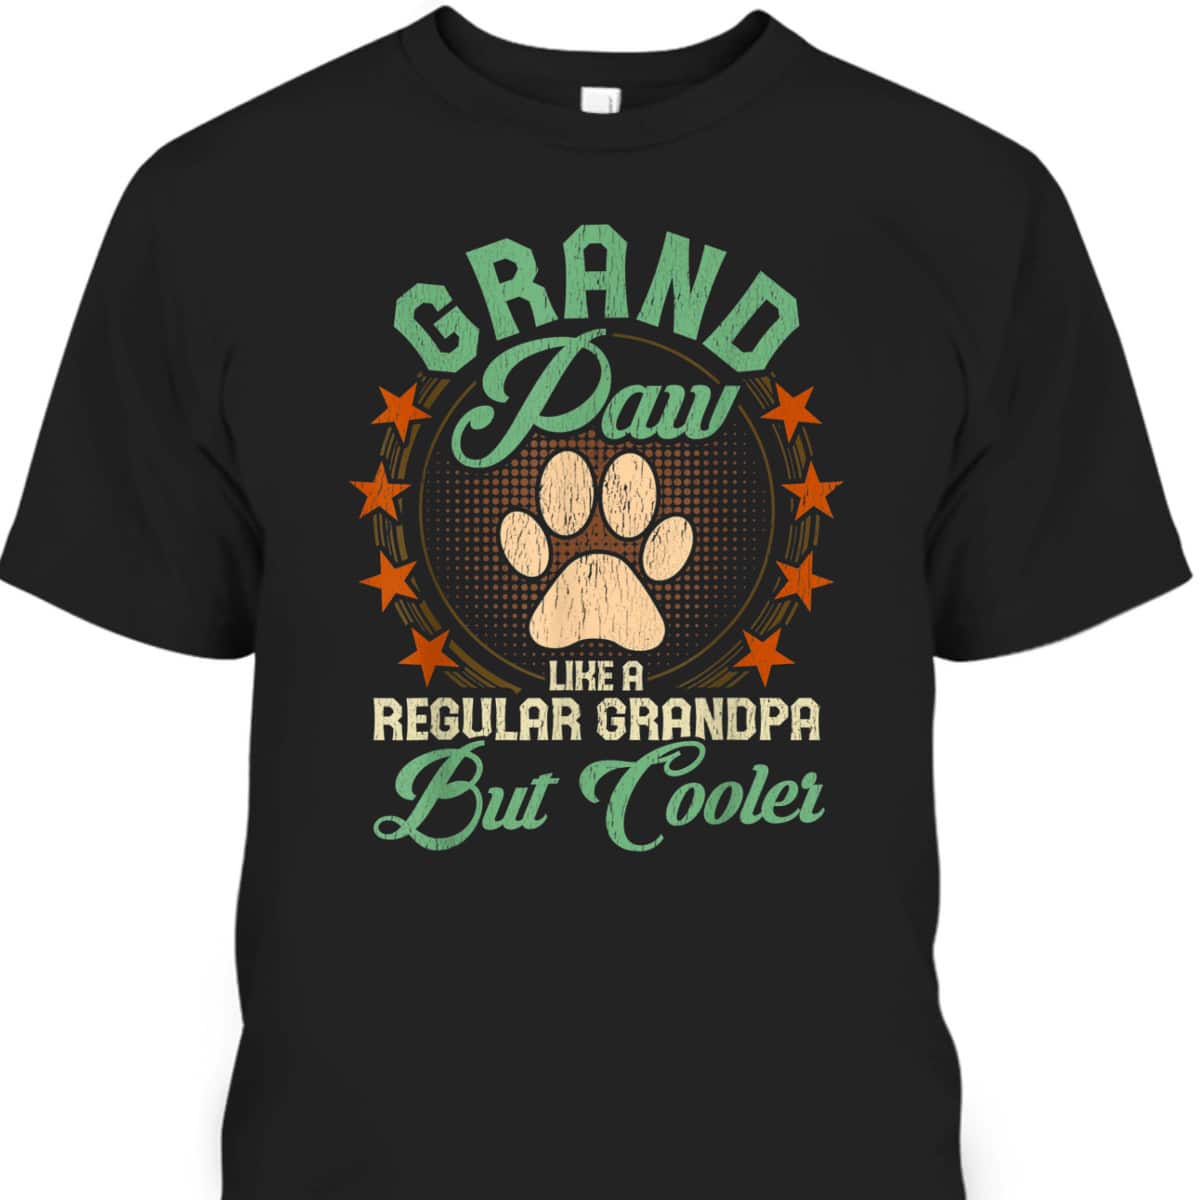 Father's Day T-Shirt Grand Paw Gift For Dog Lovers